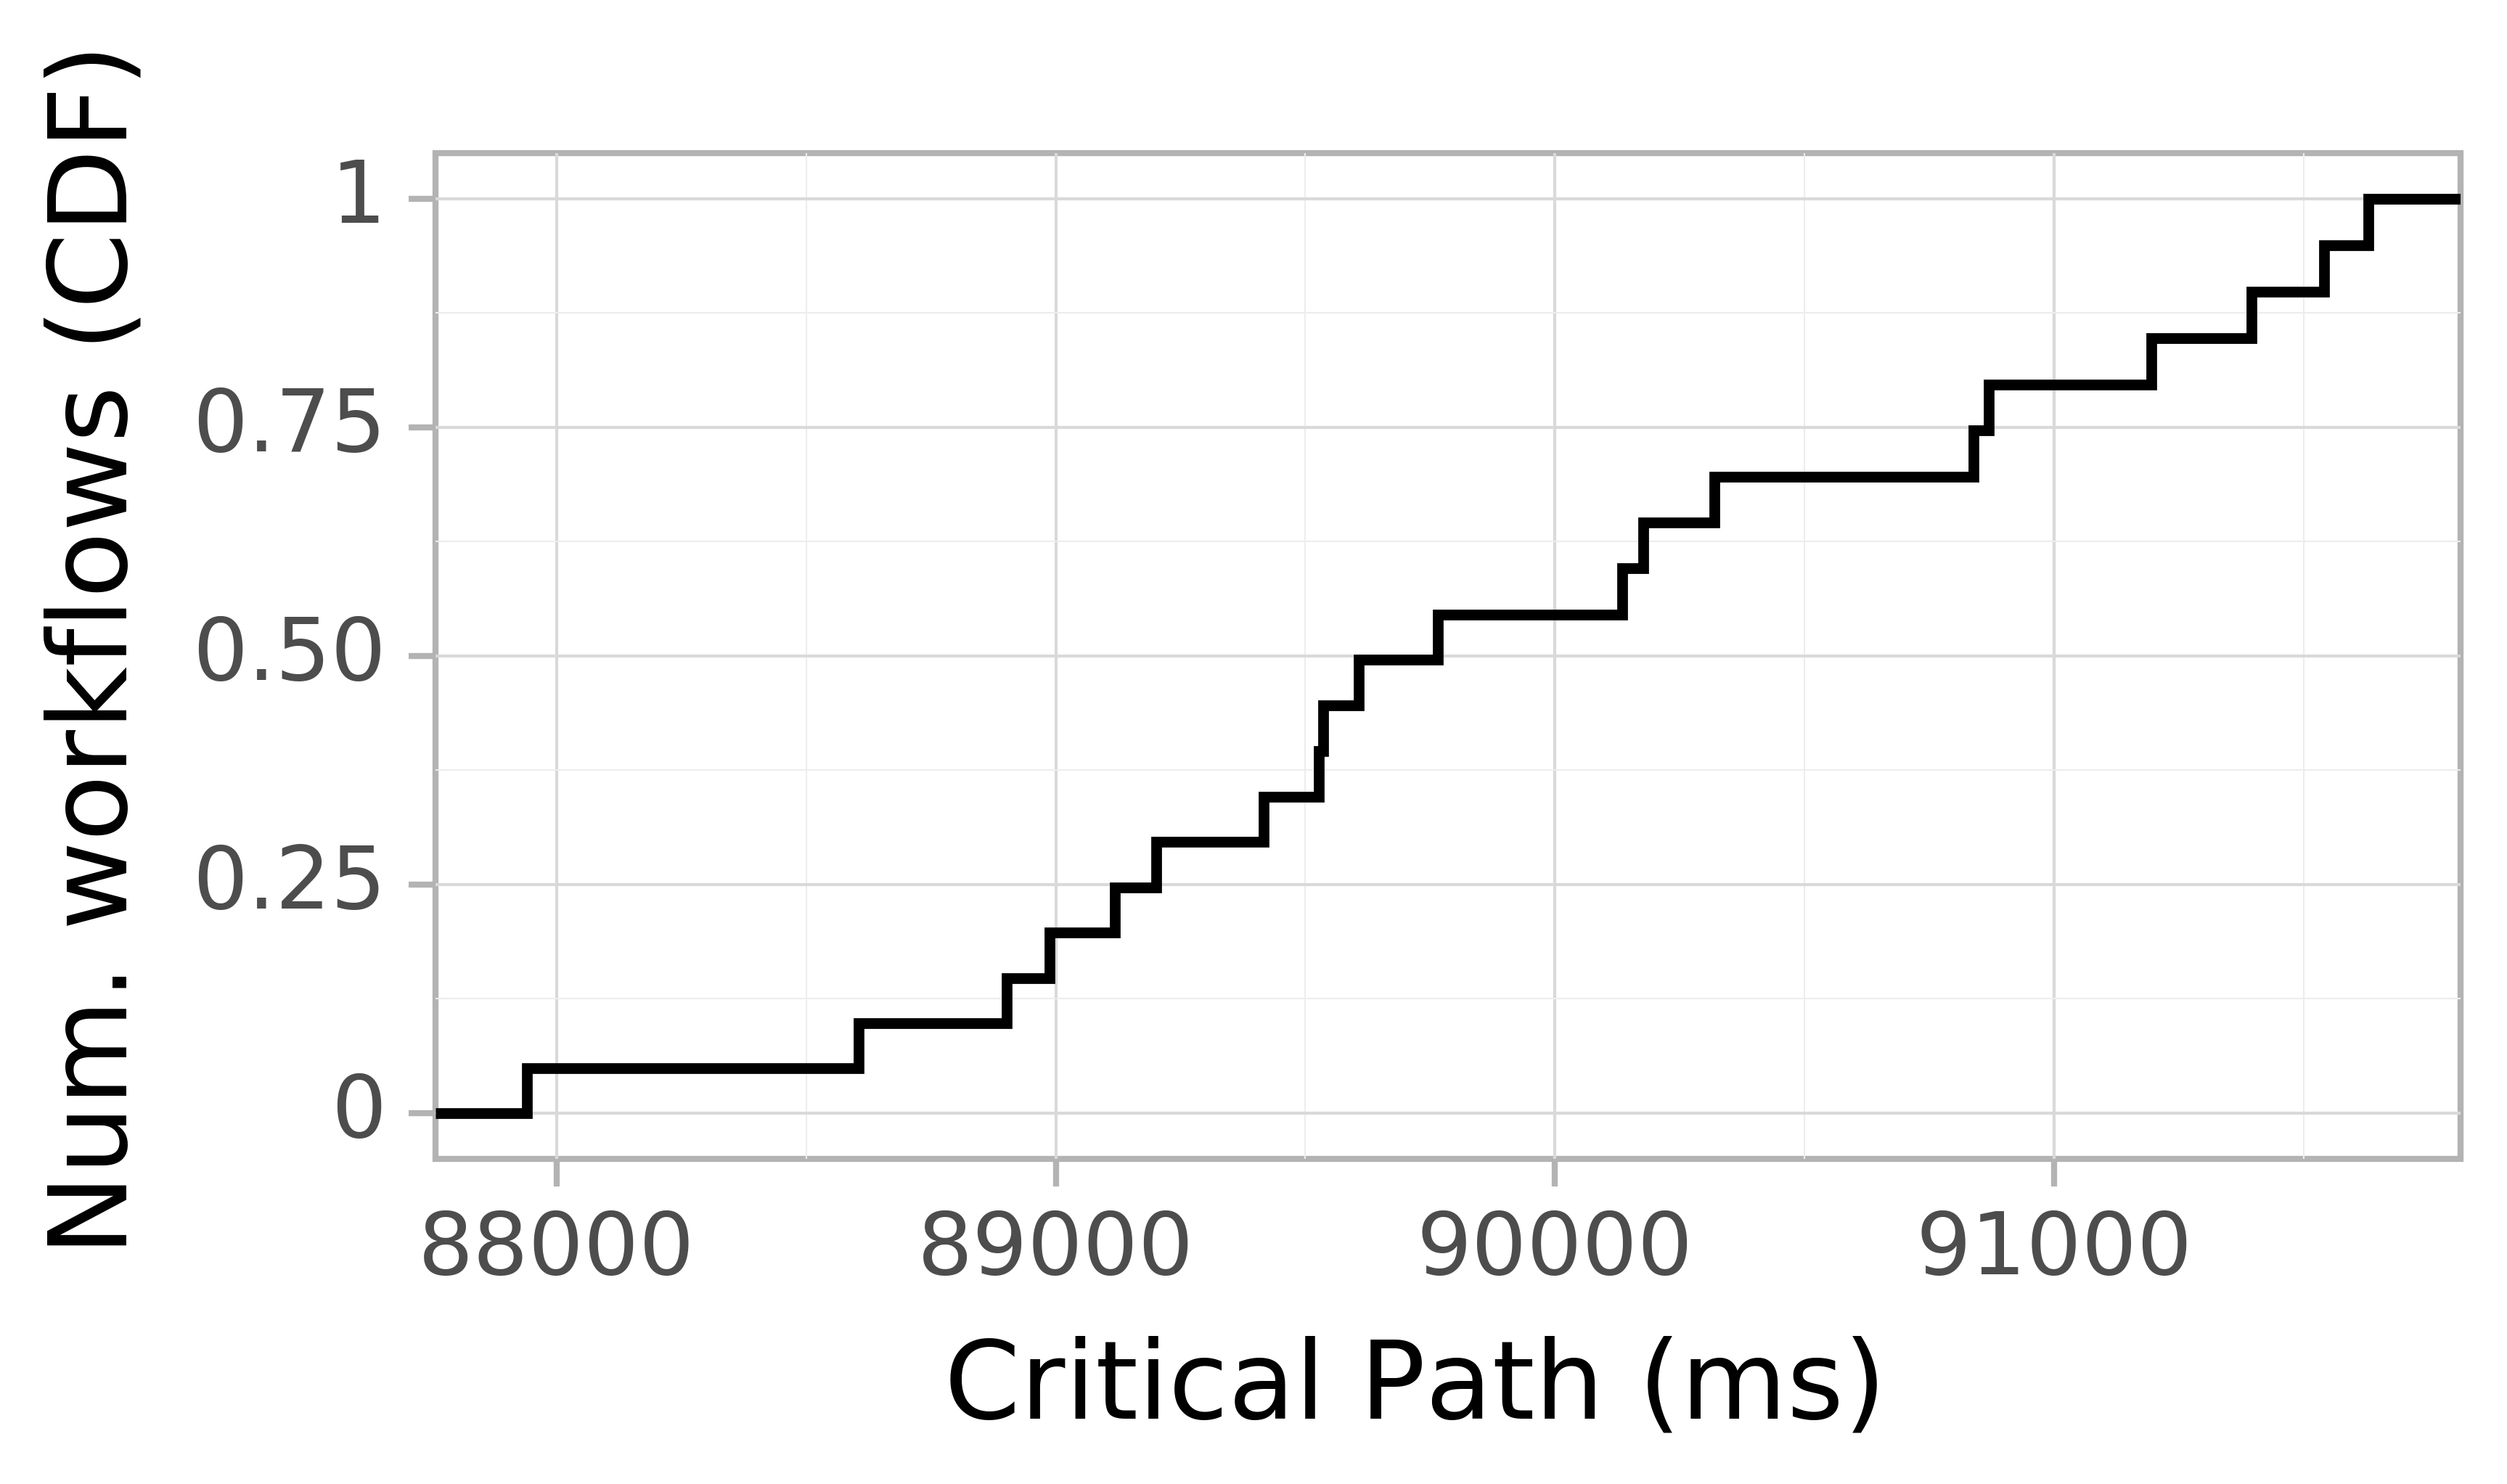 Job runtime CDF graph for the askalon-new_ee7 trace.